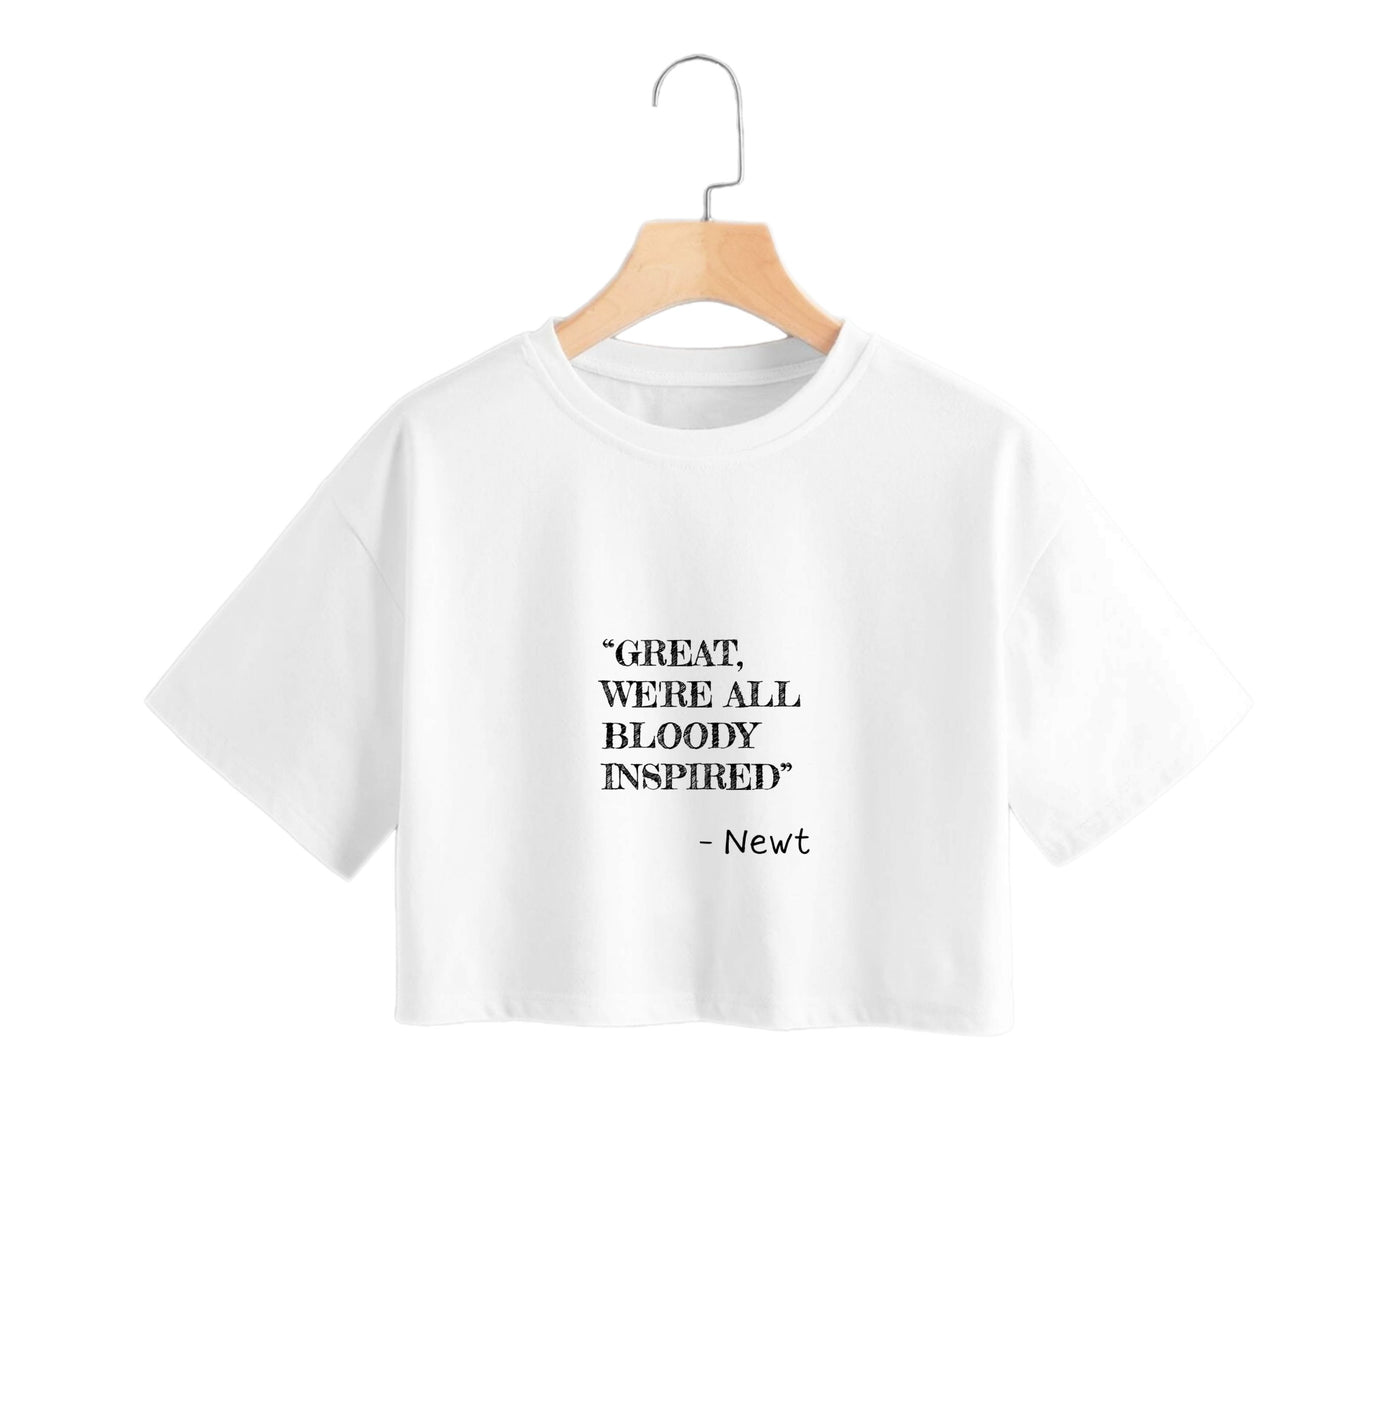 Great, We're All Bloody Inspired - Newt Crop Top